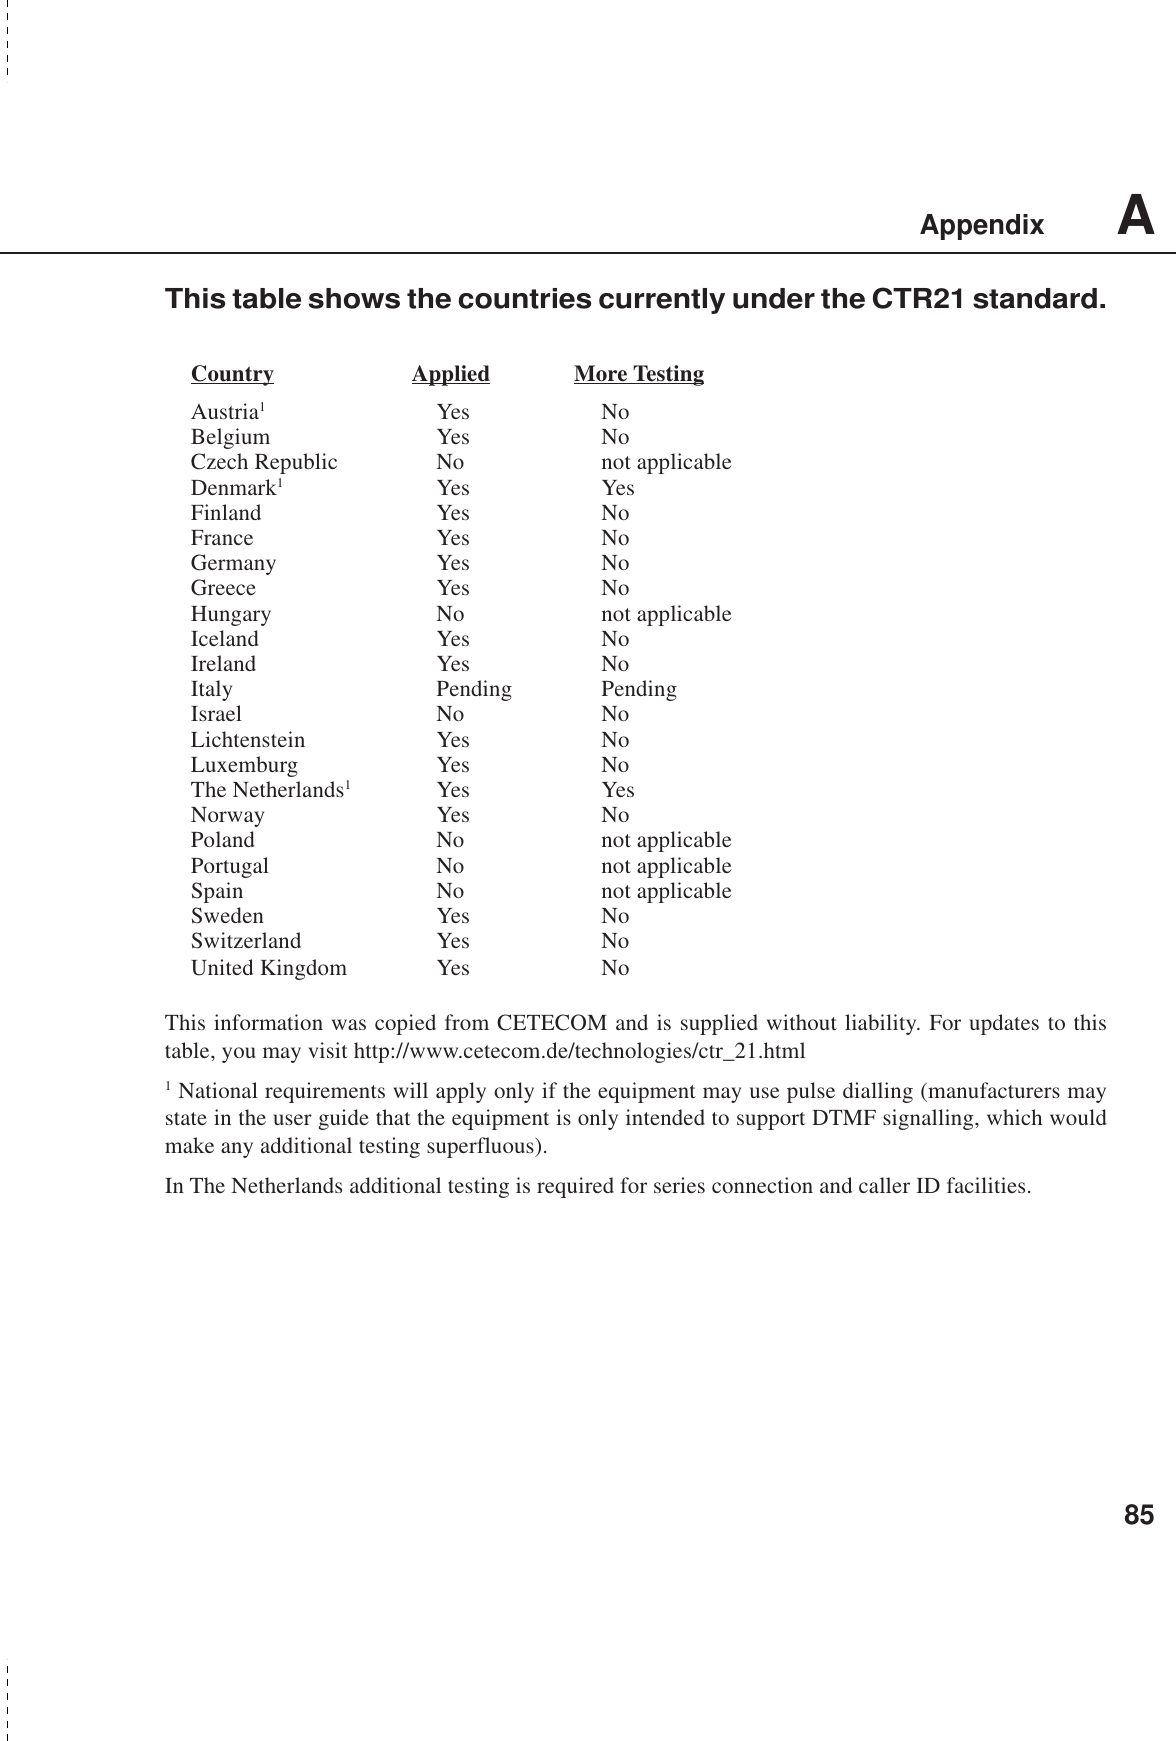 AppendixA85This table shows the countries currently under the CTR21 standard.Country Applied More TestingAustria1Yes NoBelgium Yes NoCzech Republic No not applicableDenmark1Yes YesFinland Yes NoFrance Yes NoGermany Yes NoGreece Yes NoHungary No not applicableIceland Yes NoIreland Yes NoItaly Pending PendingIsrael No NoLichtenstein Yes NoLuxemburg Yes NoThe Netherlands1Yes YesNorway Yes NoPoland No not applicablePortugal No not applicableSpain No not applicableSweden Yes NoSwitzerland Yes NoUnited Kingdom Yes NoThis information was copied from CETECOM and is supplied without liability. For updates to thistable, you may visit http://www.cetecom.de/technologies/ctr_21.html1 National requirements will apply only if the equipment may use pulse dialling (manufacturers maystate in the user guide that the equipment is only intended to support DTMF signalling, which wouldmake any additional testing superfluous).In The Netherlands additional testing is required for series connection and caller ID facilities.